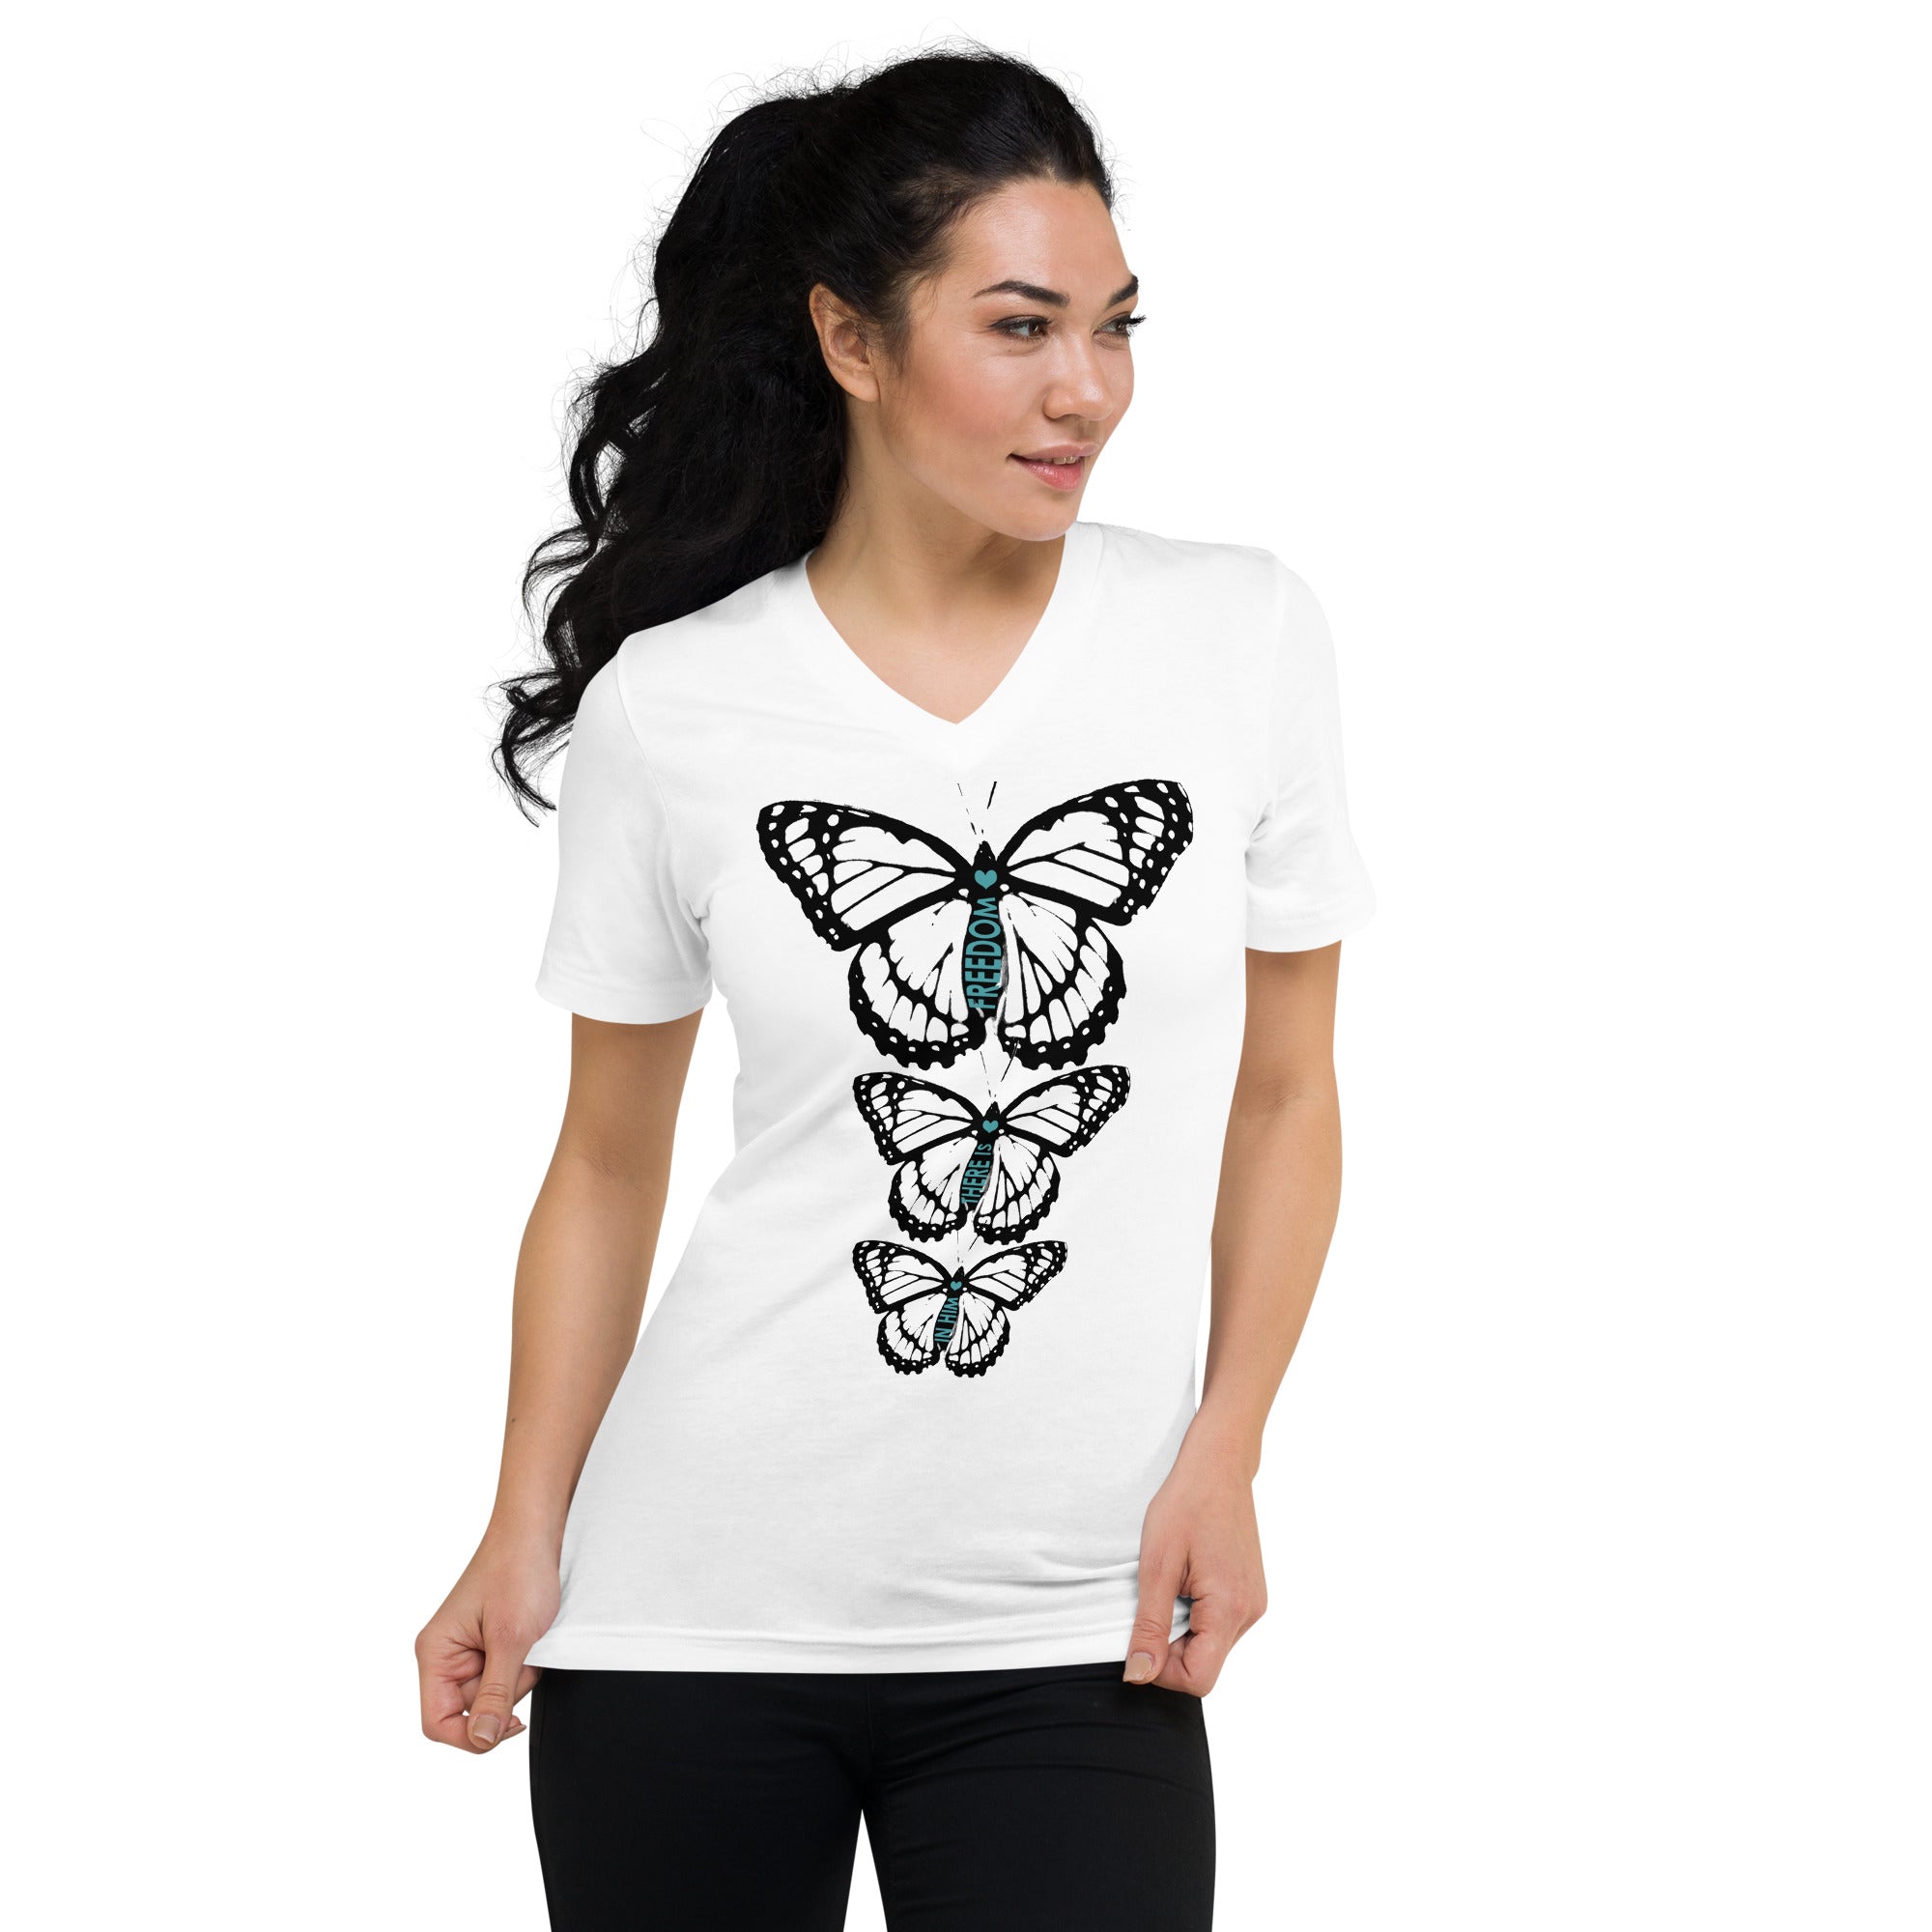 In Him There is Freedom ~ Butterfly Graphic T-Shirt, Unisex